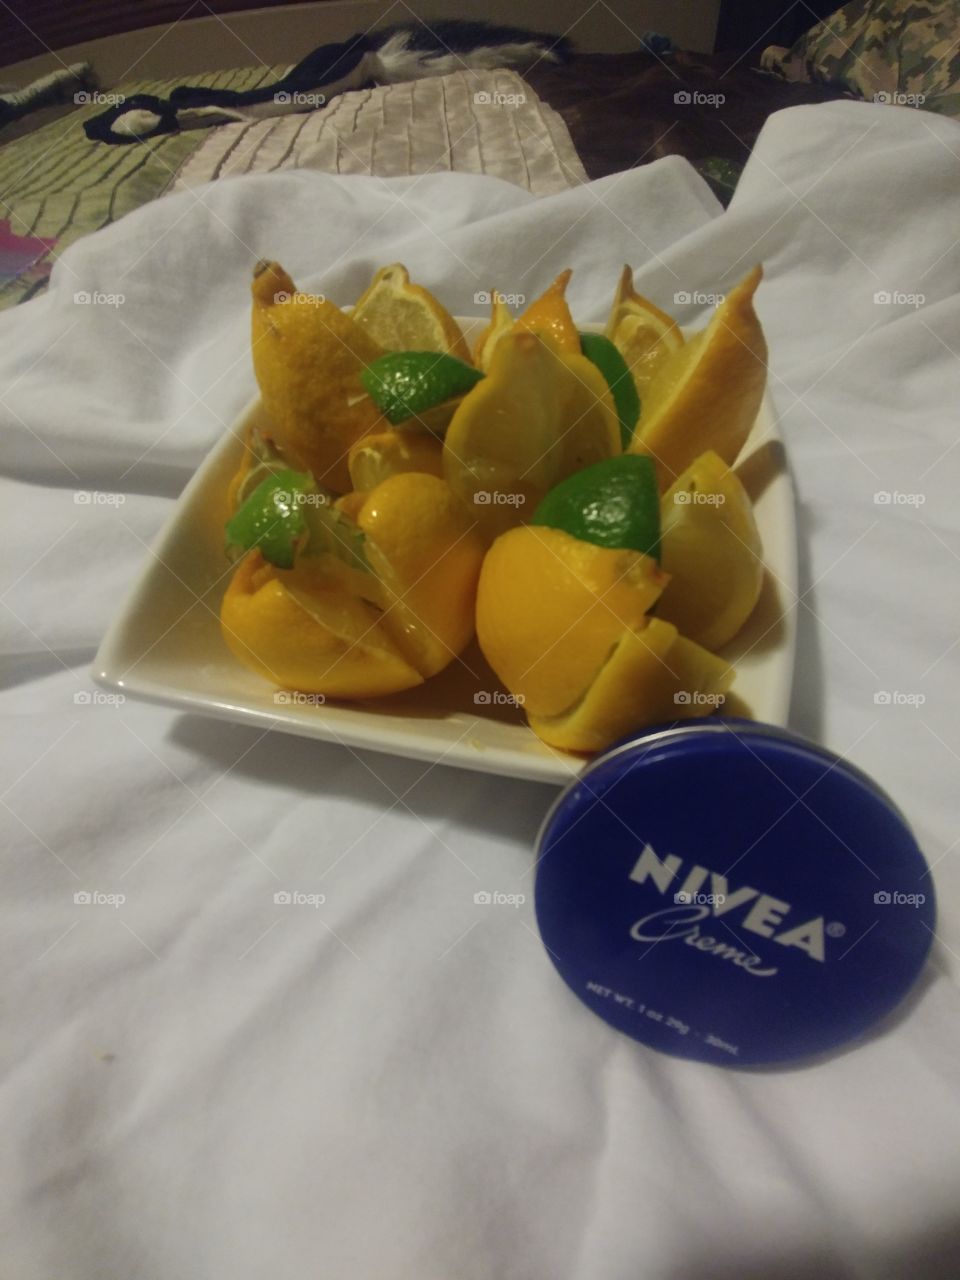 Beautiful way to start the day with fresh lemonsalong with fresh Limes and Nivea Cream to help with dry skin.